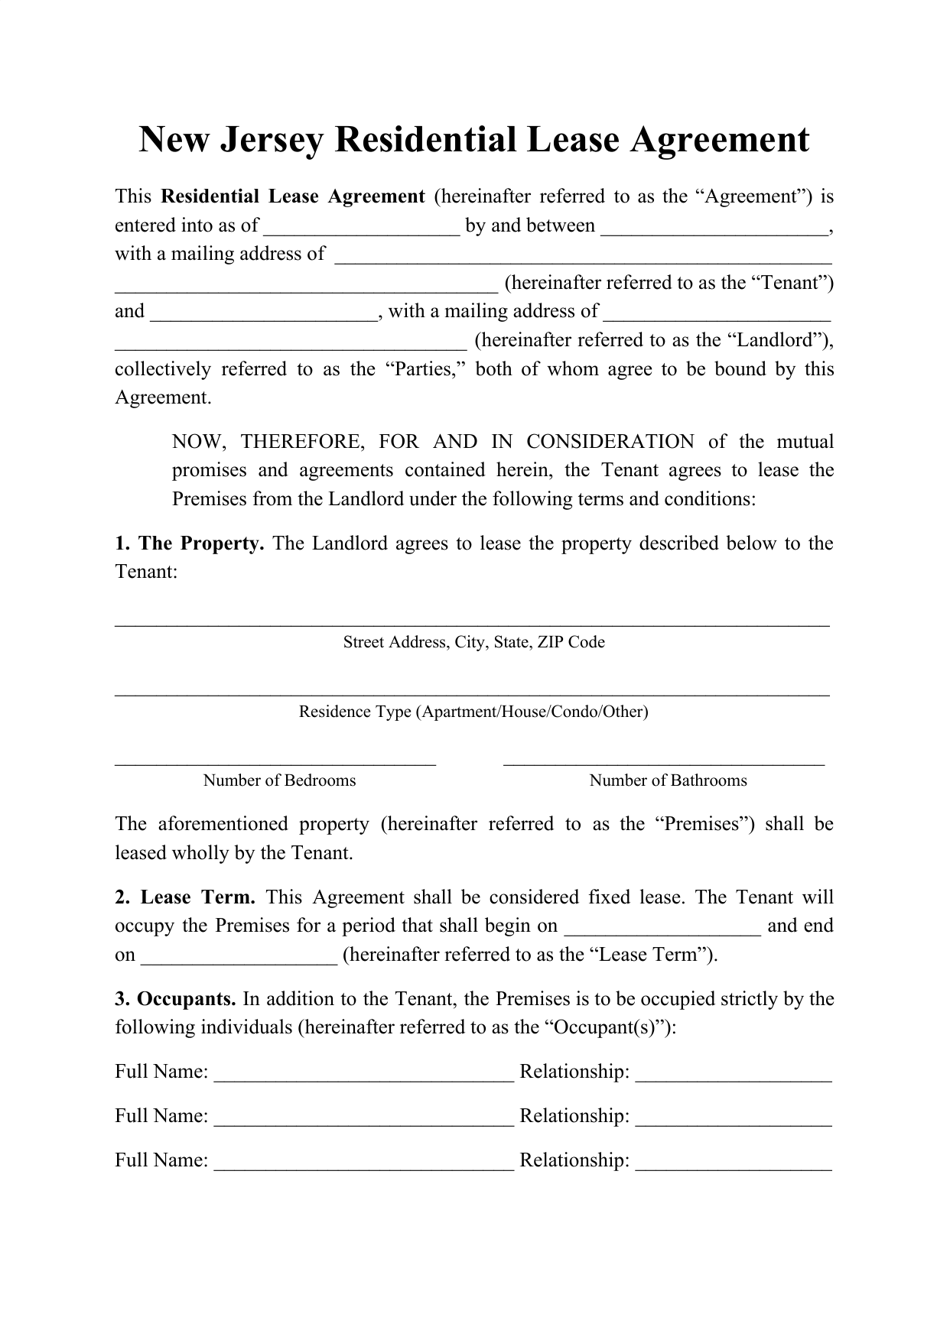 Residential Lease Agreement Template - New Jersey, Page 1